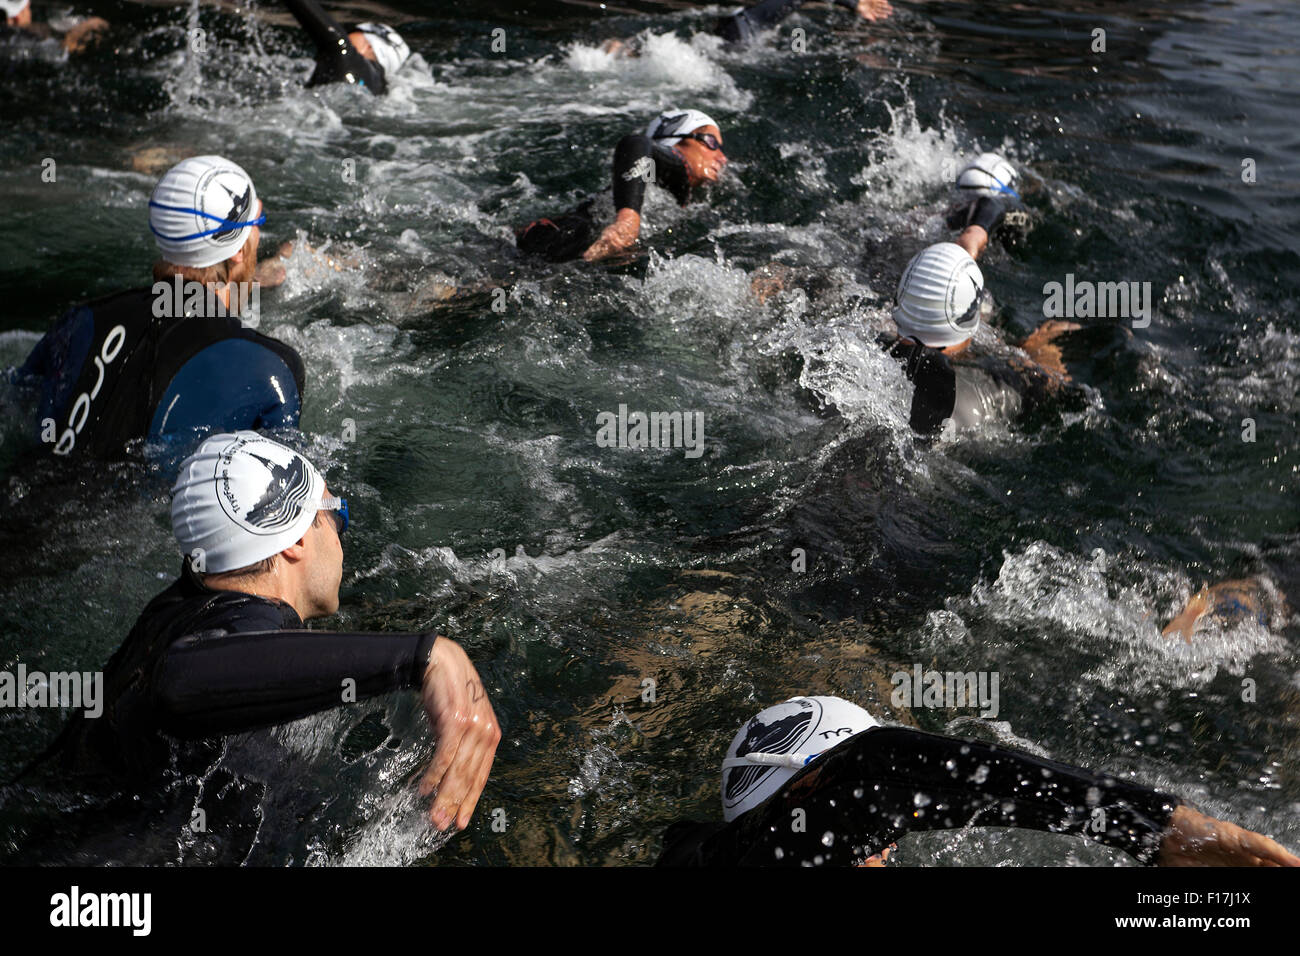 Copenhagen, Denmark, August 29th, 2015. Swimmers on their way in the channels encircling the Danish parliament, Christiansborg. Some 3.300 swimmers takes the 2 km tour round Christiansborg in this yearly recurrent fun race organized by the Danish Swimming Federation. Credit:  OJPHOTOS/Alamy Live News Stock Photo